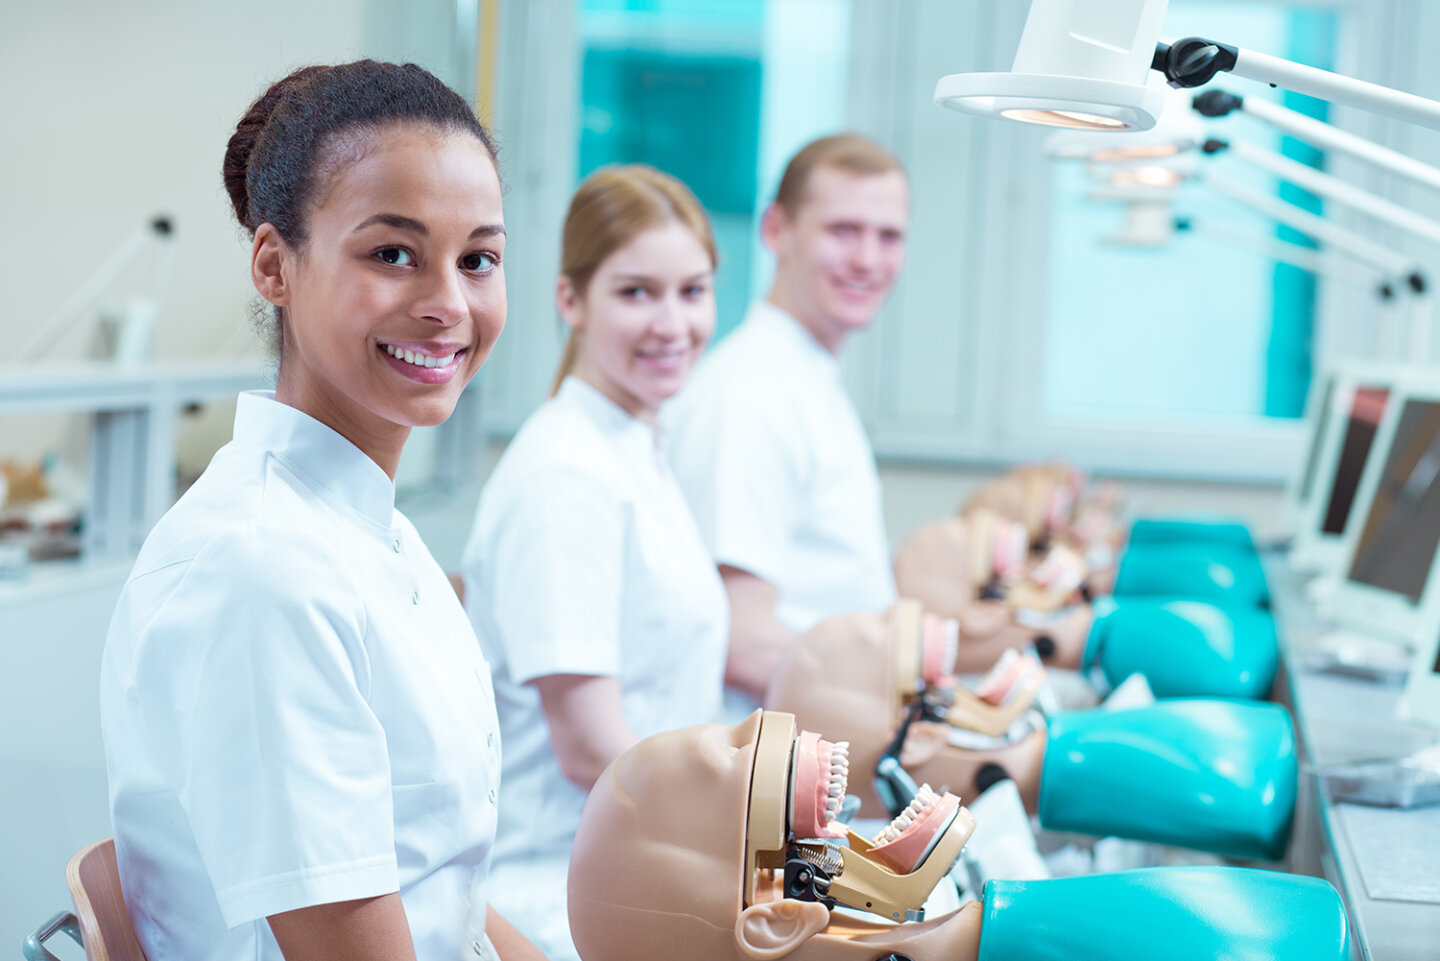 Study dentistry abroad